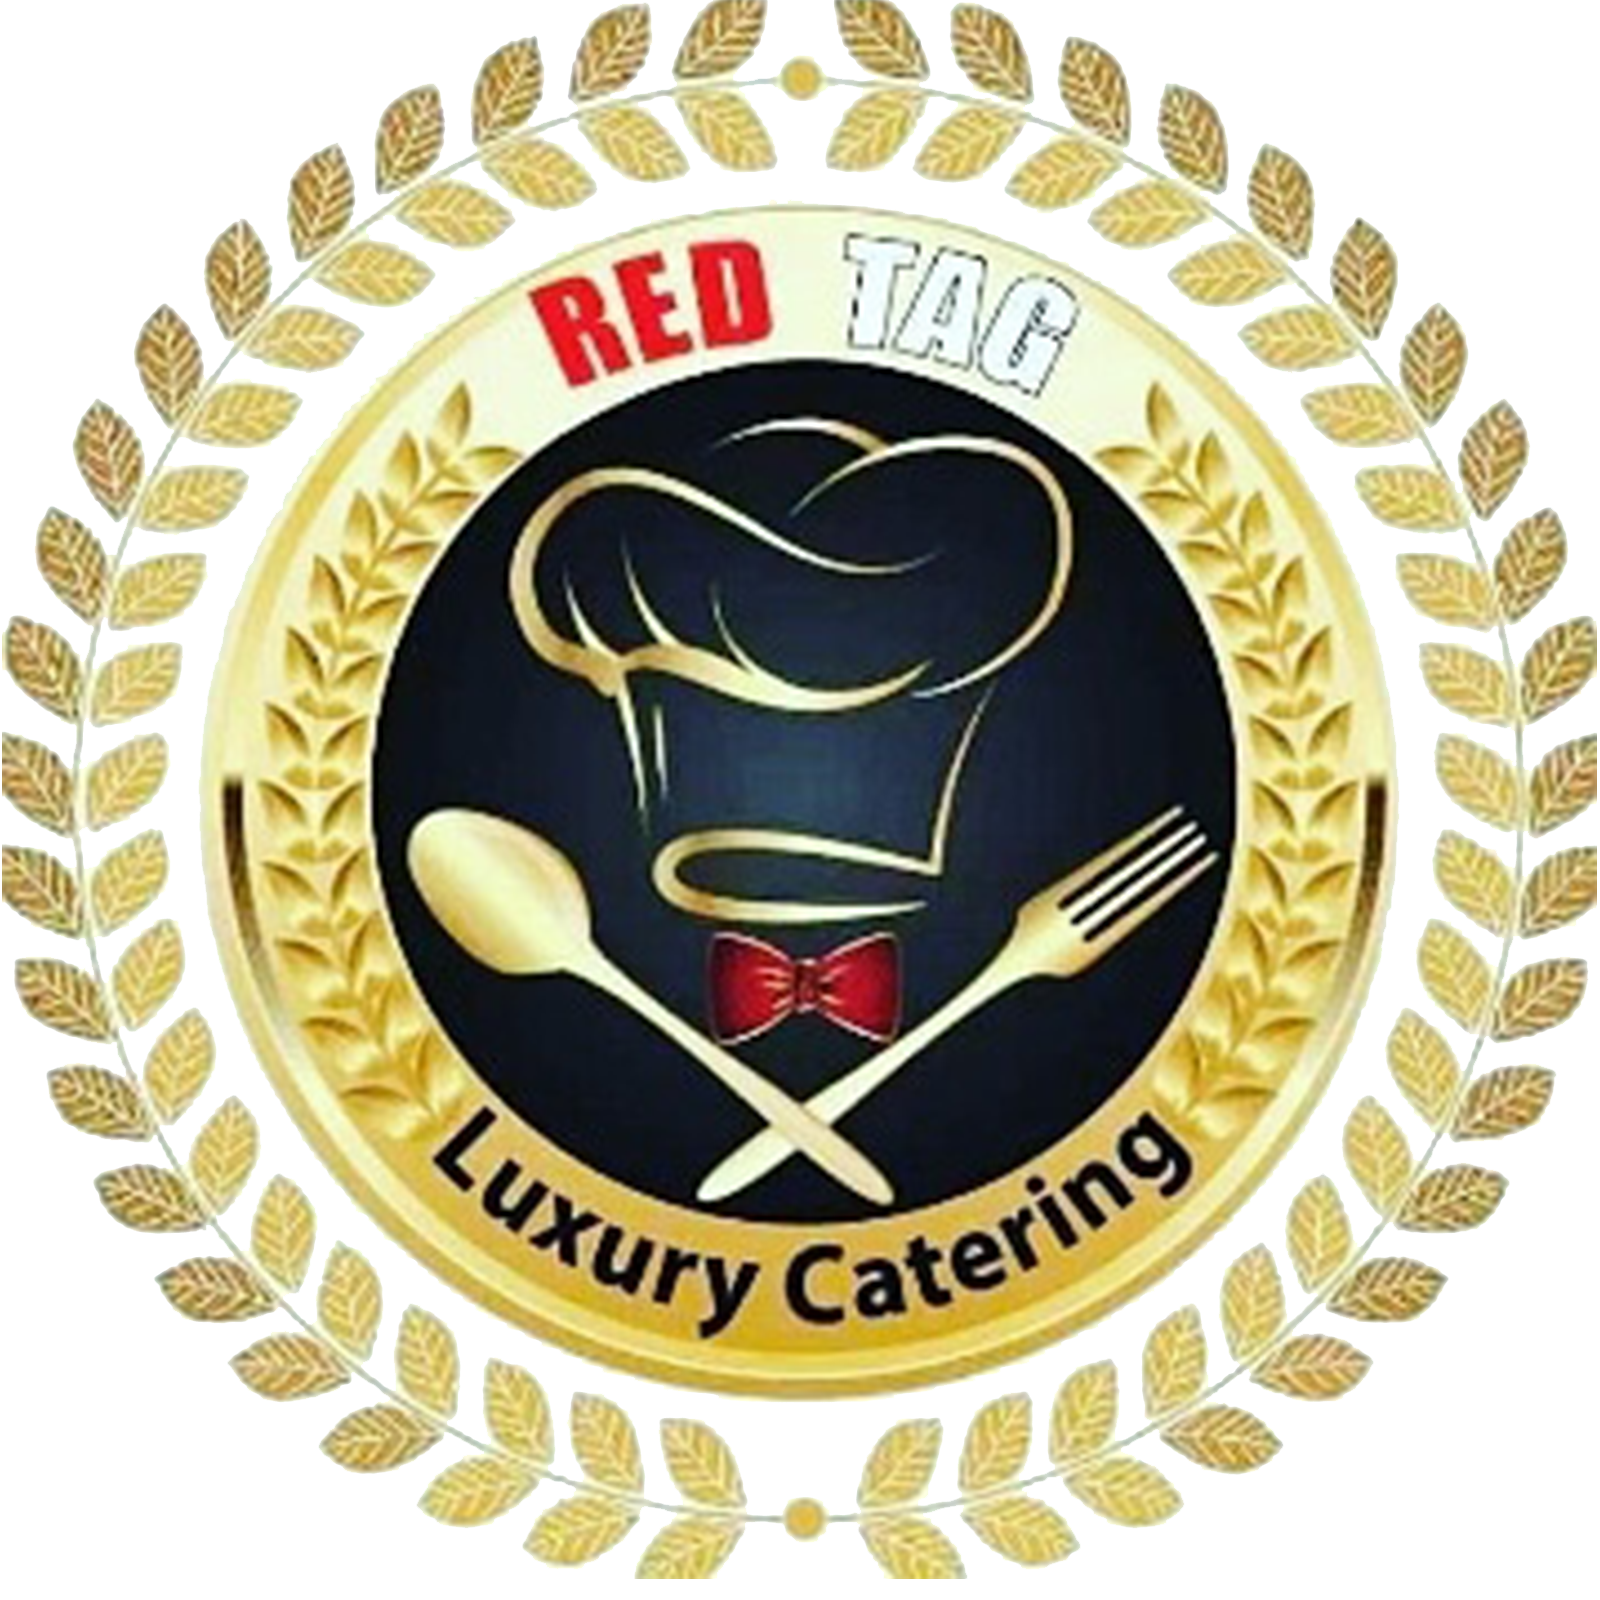 Red Tag Caterers  best catering services in chandigarh,famous caterers in chandigarh,top 10 caterers in chandigarh,delicious catering Chandigarh,best catering services in Chandigarh,best caterers in Chandigarh,top catering services in Chandigarh,top caterers in Chandigarh,famous catering services in Chandigarh,famouscaterers in Chandigarh,top catering services in nayagoan,top caterers in nayagoan,expert catering services in Chandigarh,expert catering in Chandigarh,caterers in Chandigarh,catering  in Chandigarh
